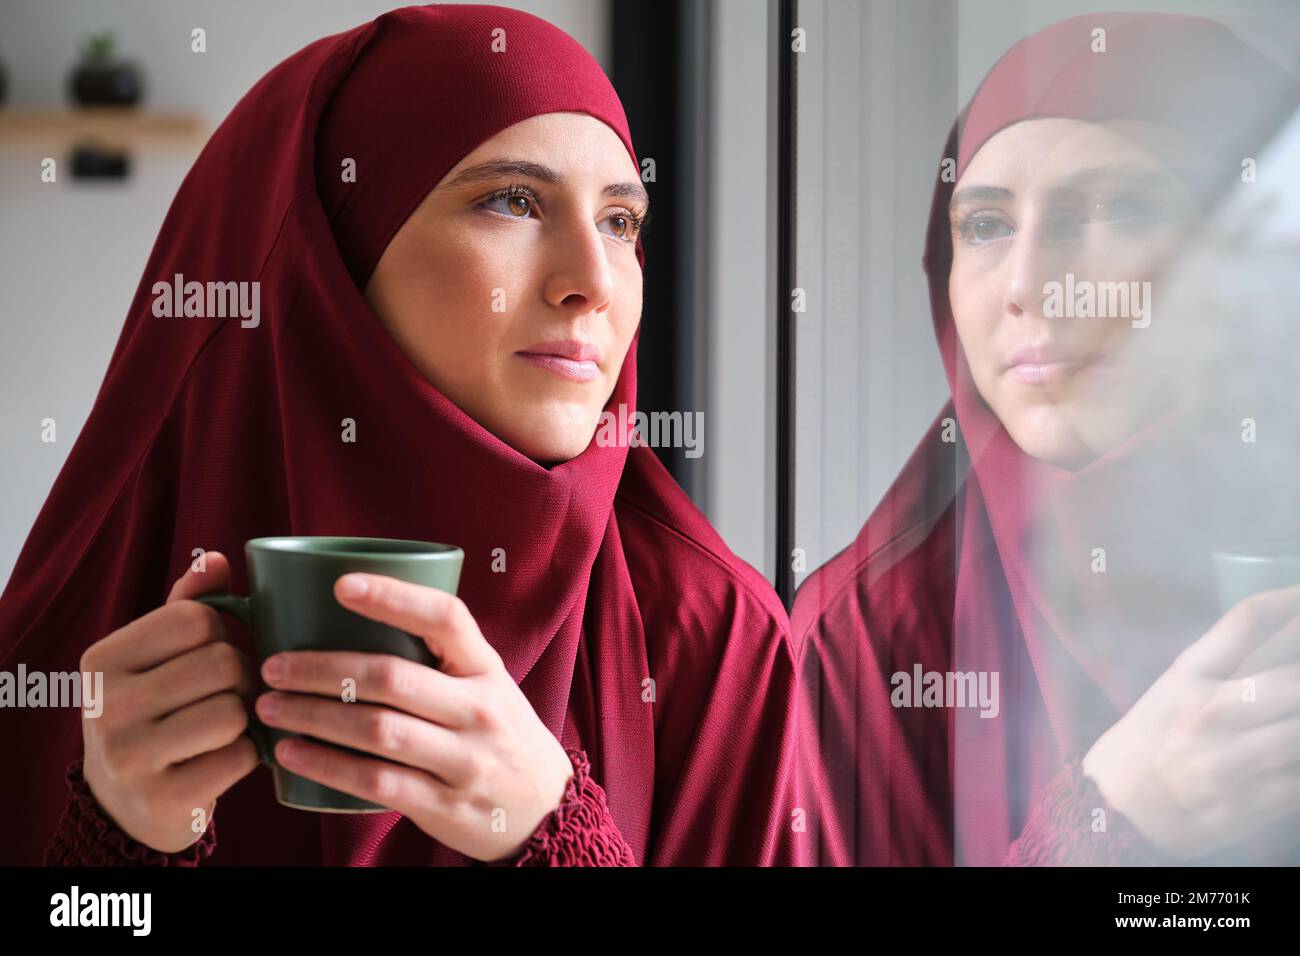 Muslim woman in hijab with a coffee cup looking through a window. Stock Photo